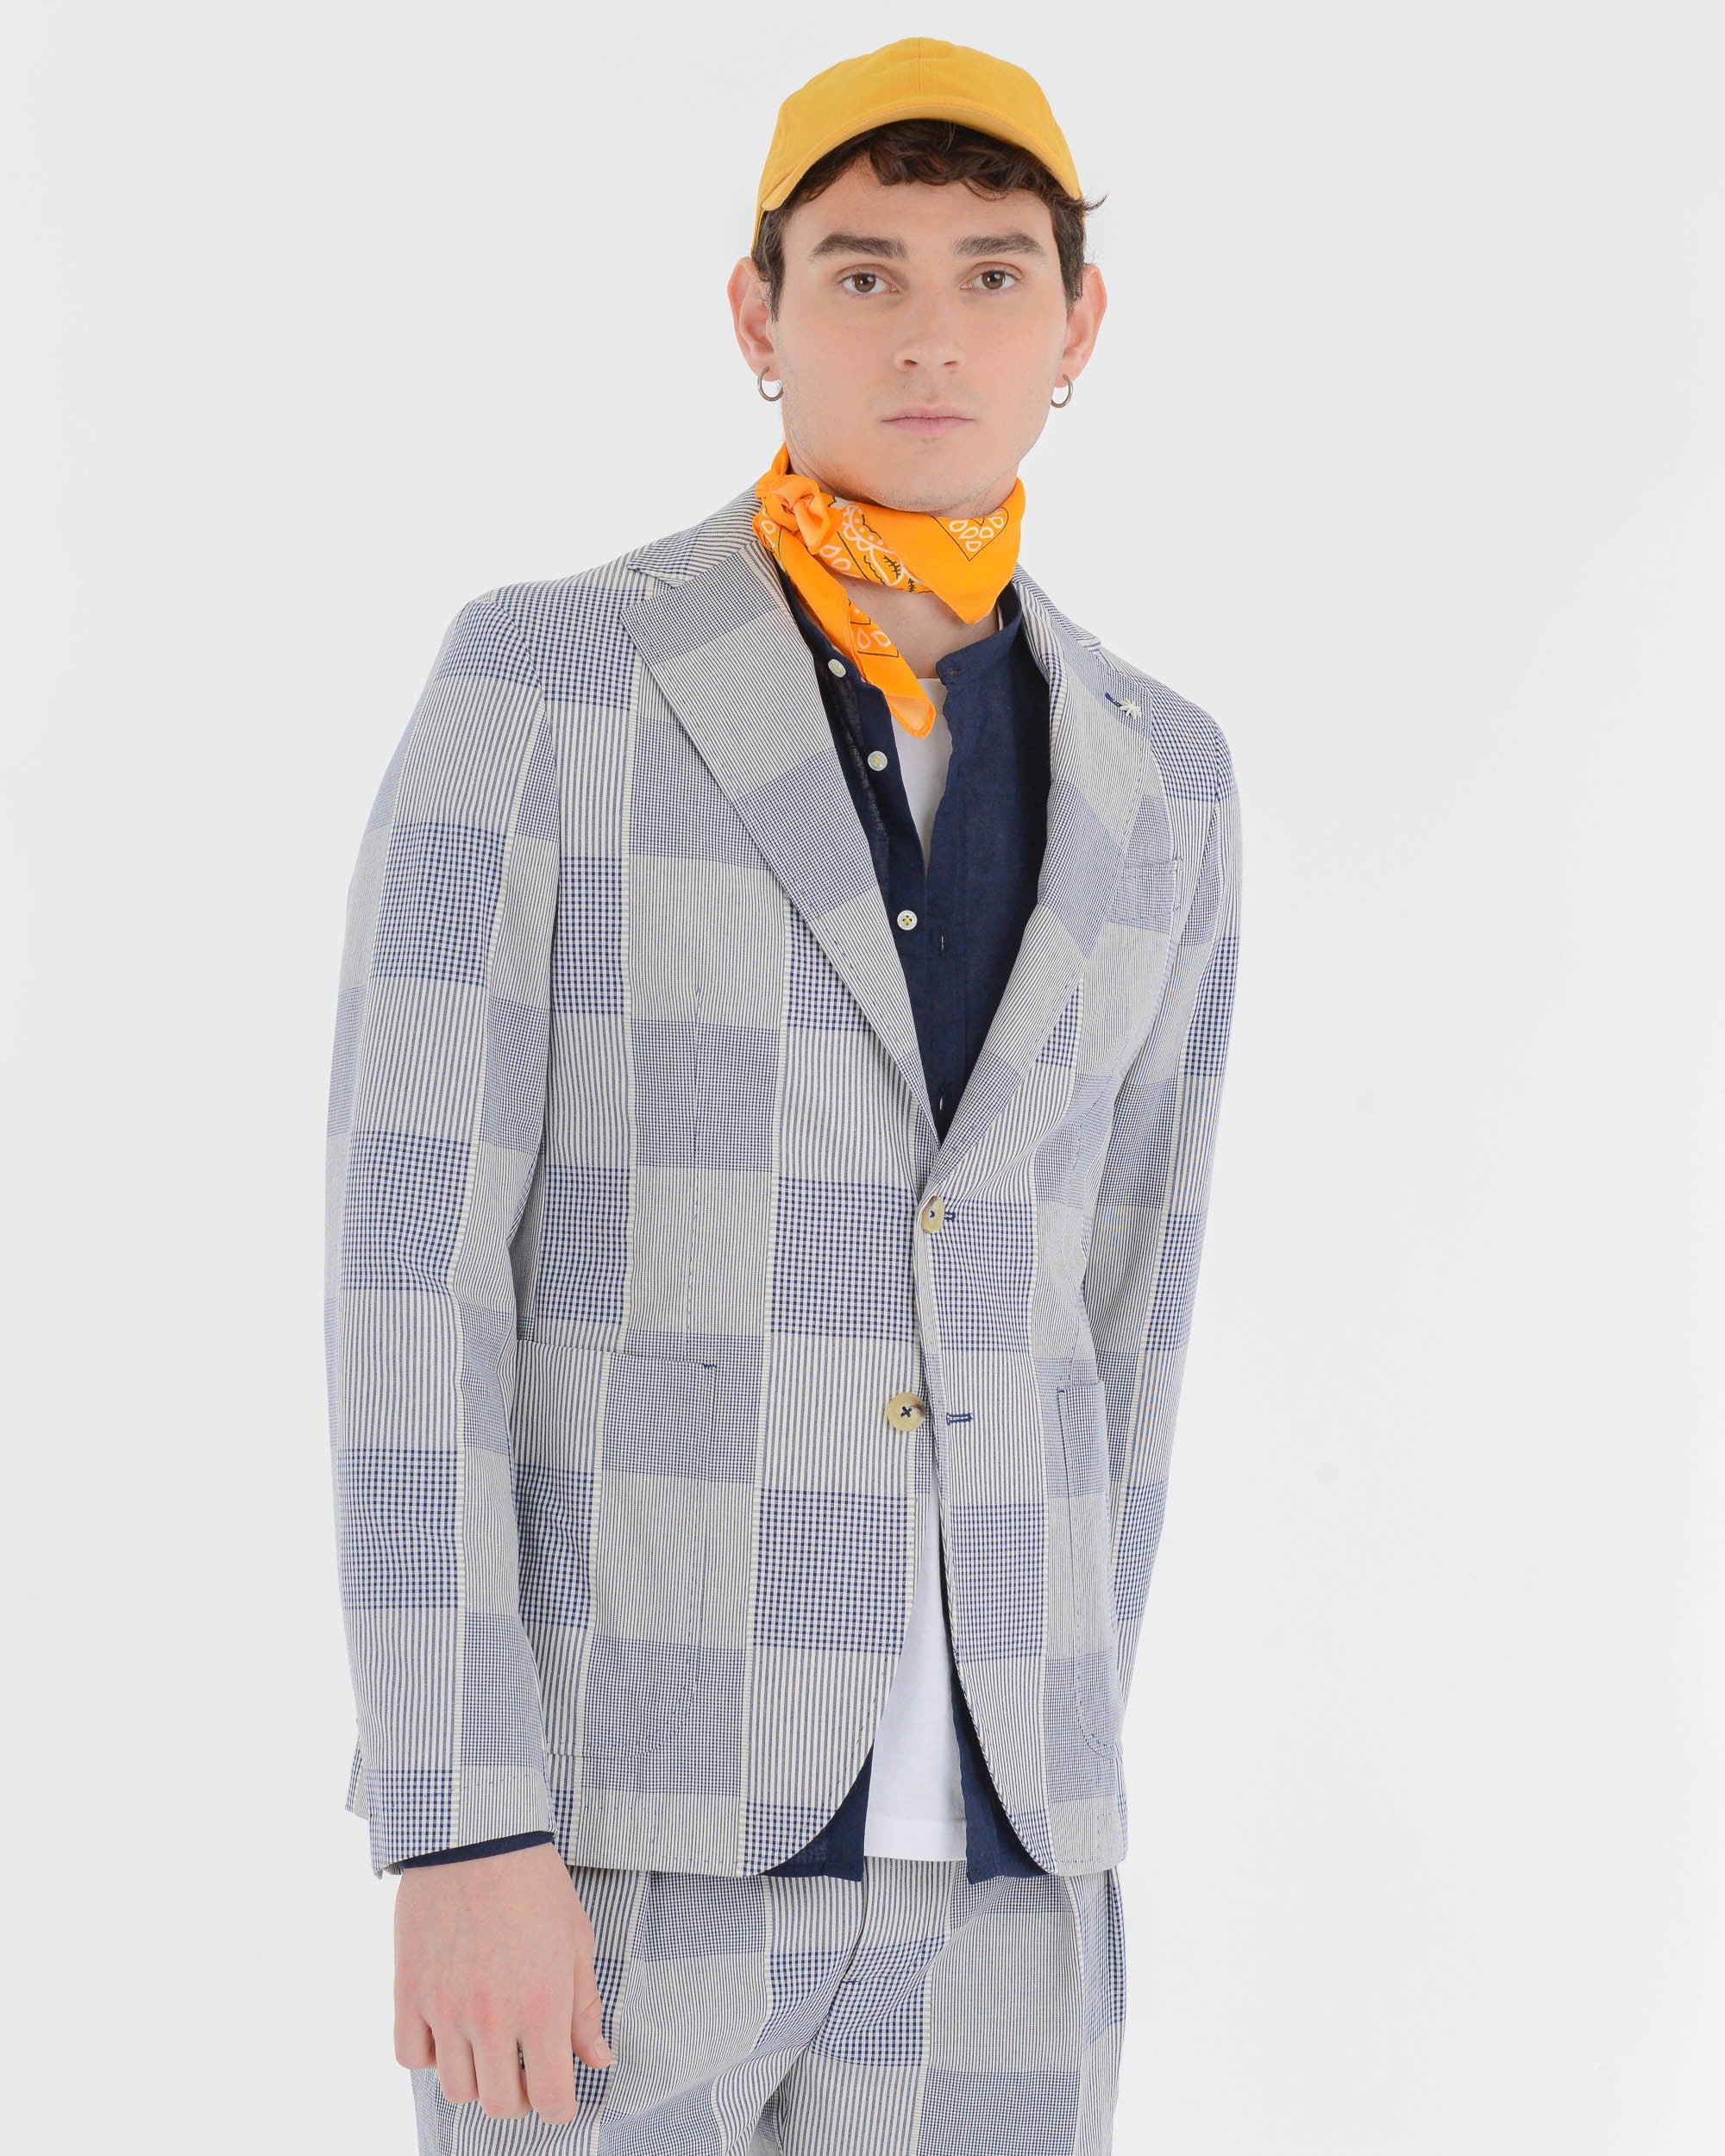 Men's Clothing and Accessories - Manuel Ritz Official